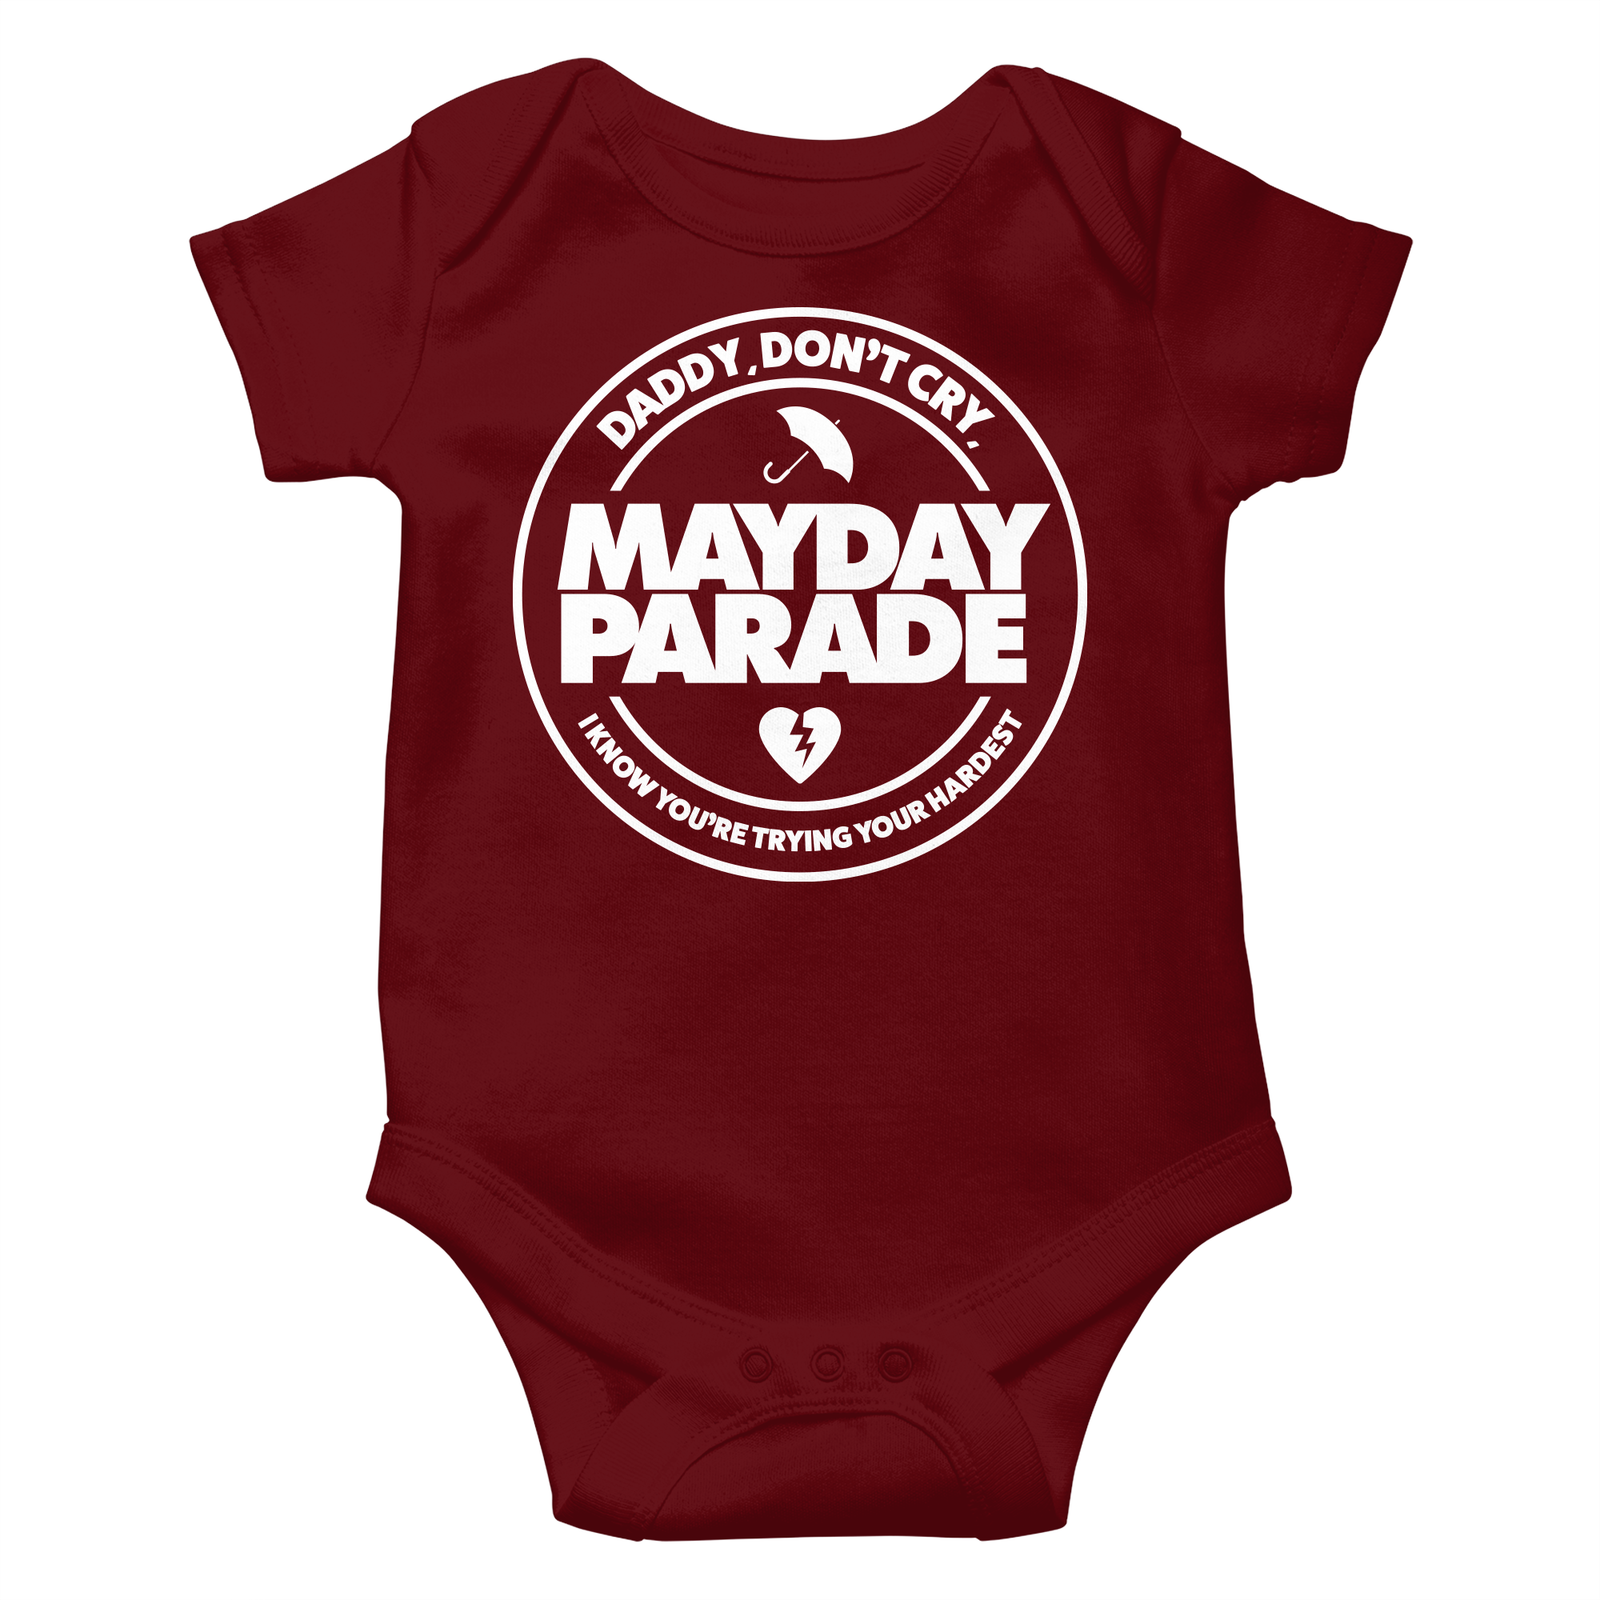 Mayday Parade "Daddy" Onesie